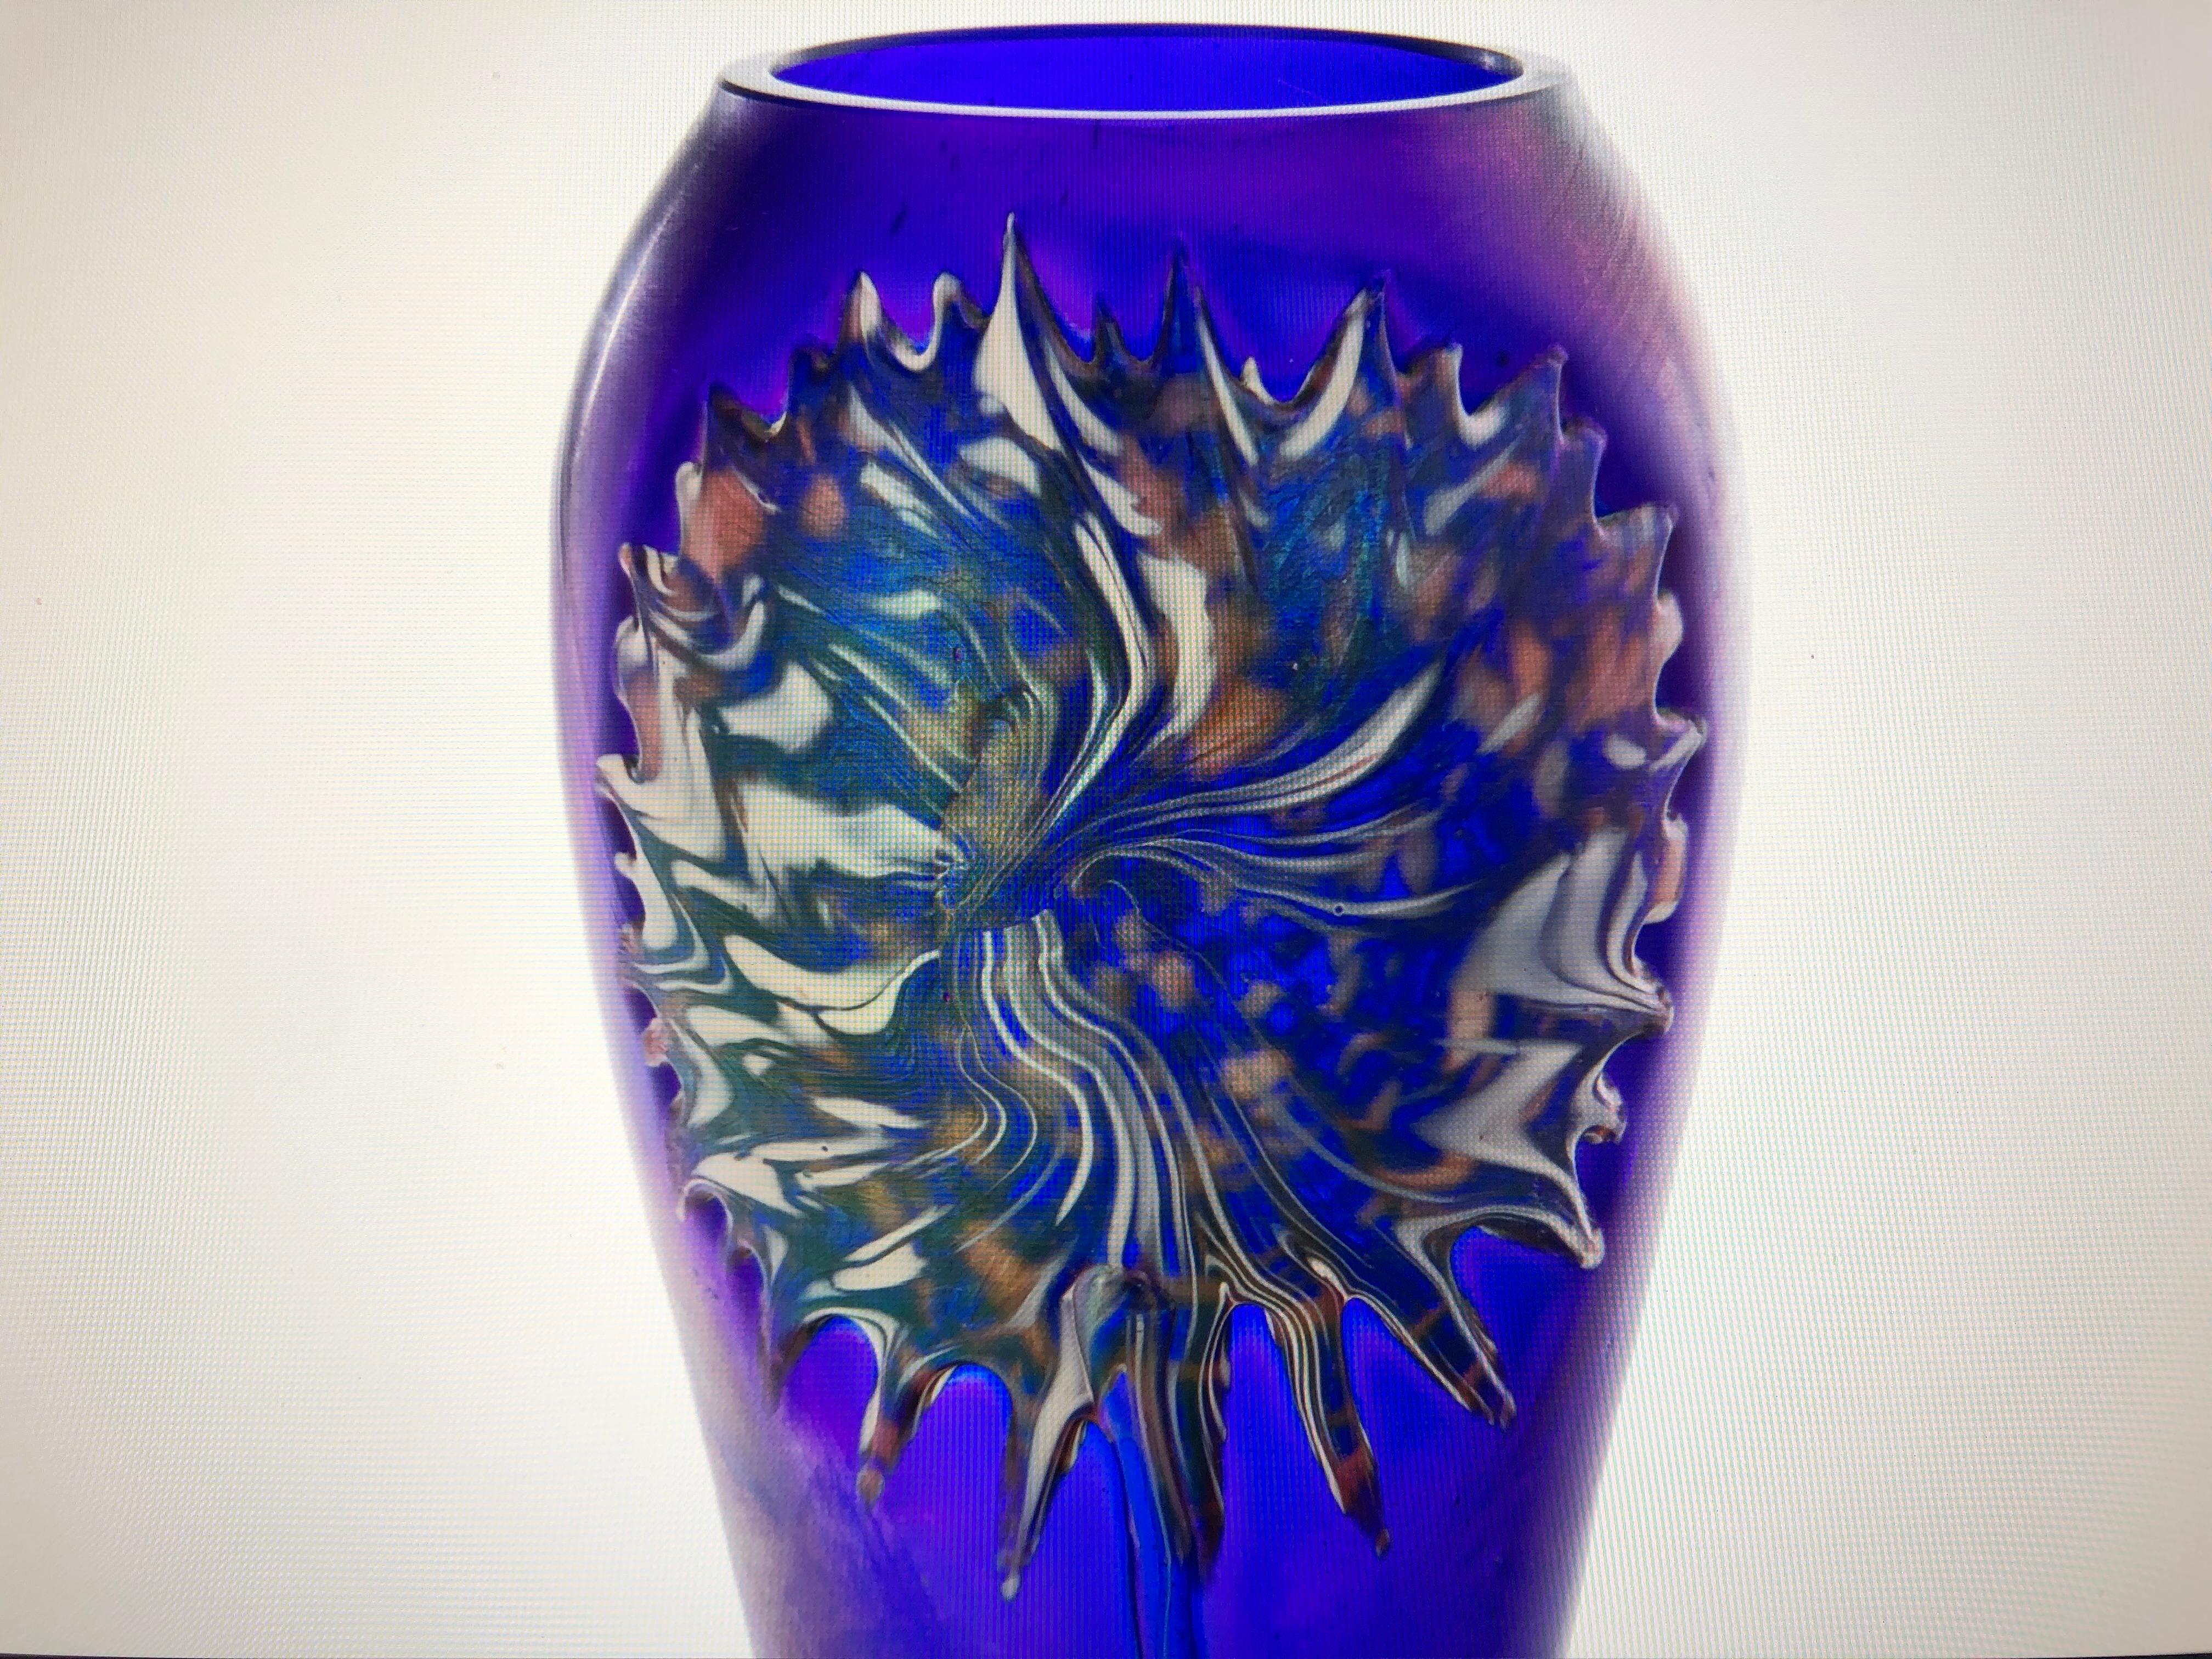 A stunning, irisdescent, purple baluster form vase with a stylized floral bloom in green and orange. Attributed to Quezal, early 20th Century. In perfect condition.
The Quezal Art Glass and Decorating Company began in New York in 1901 under the